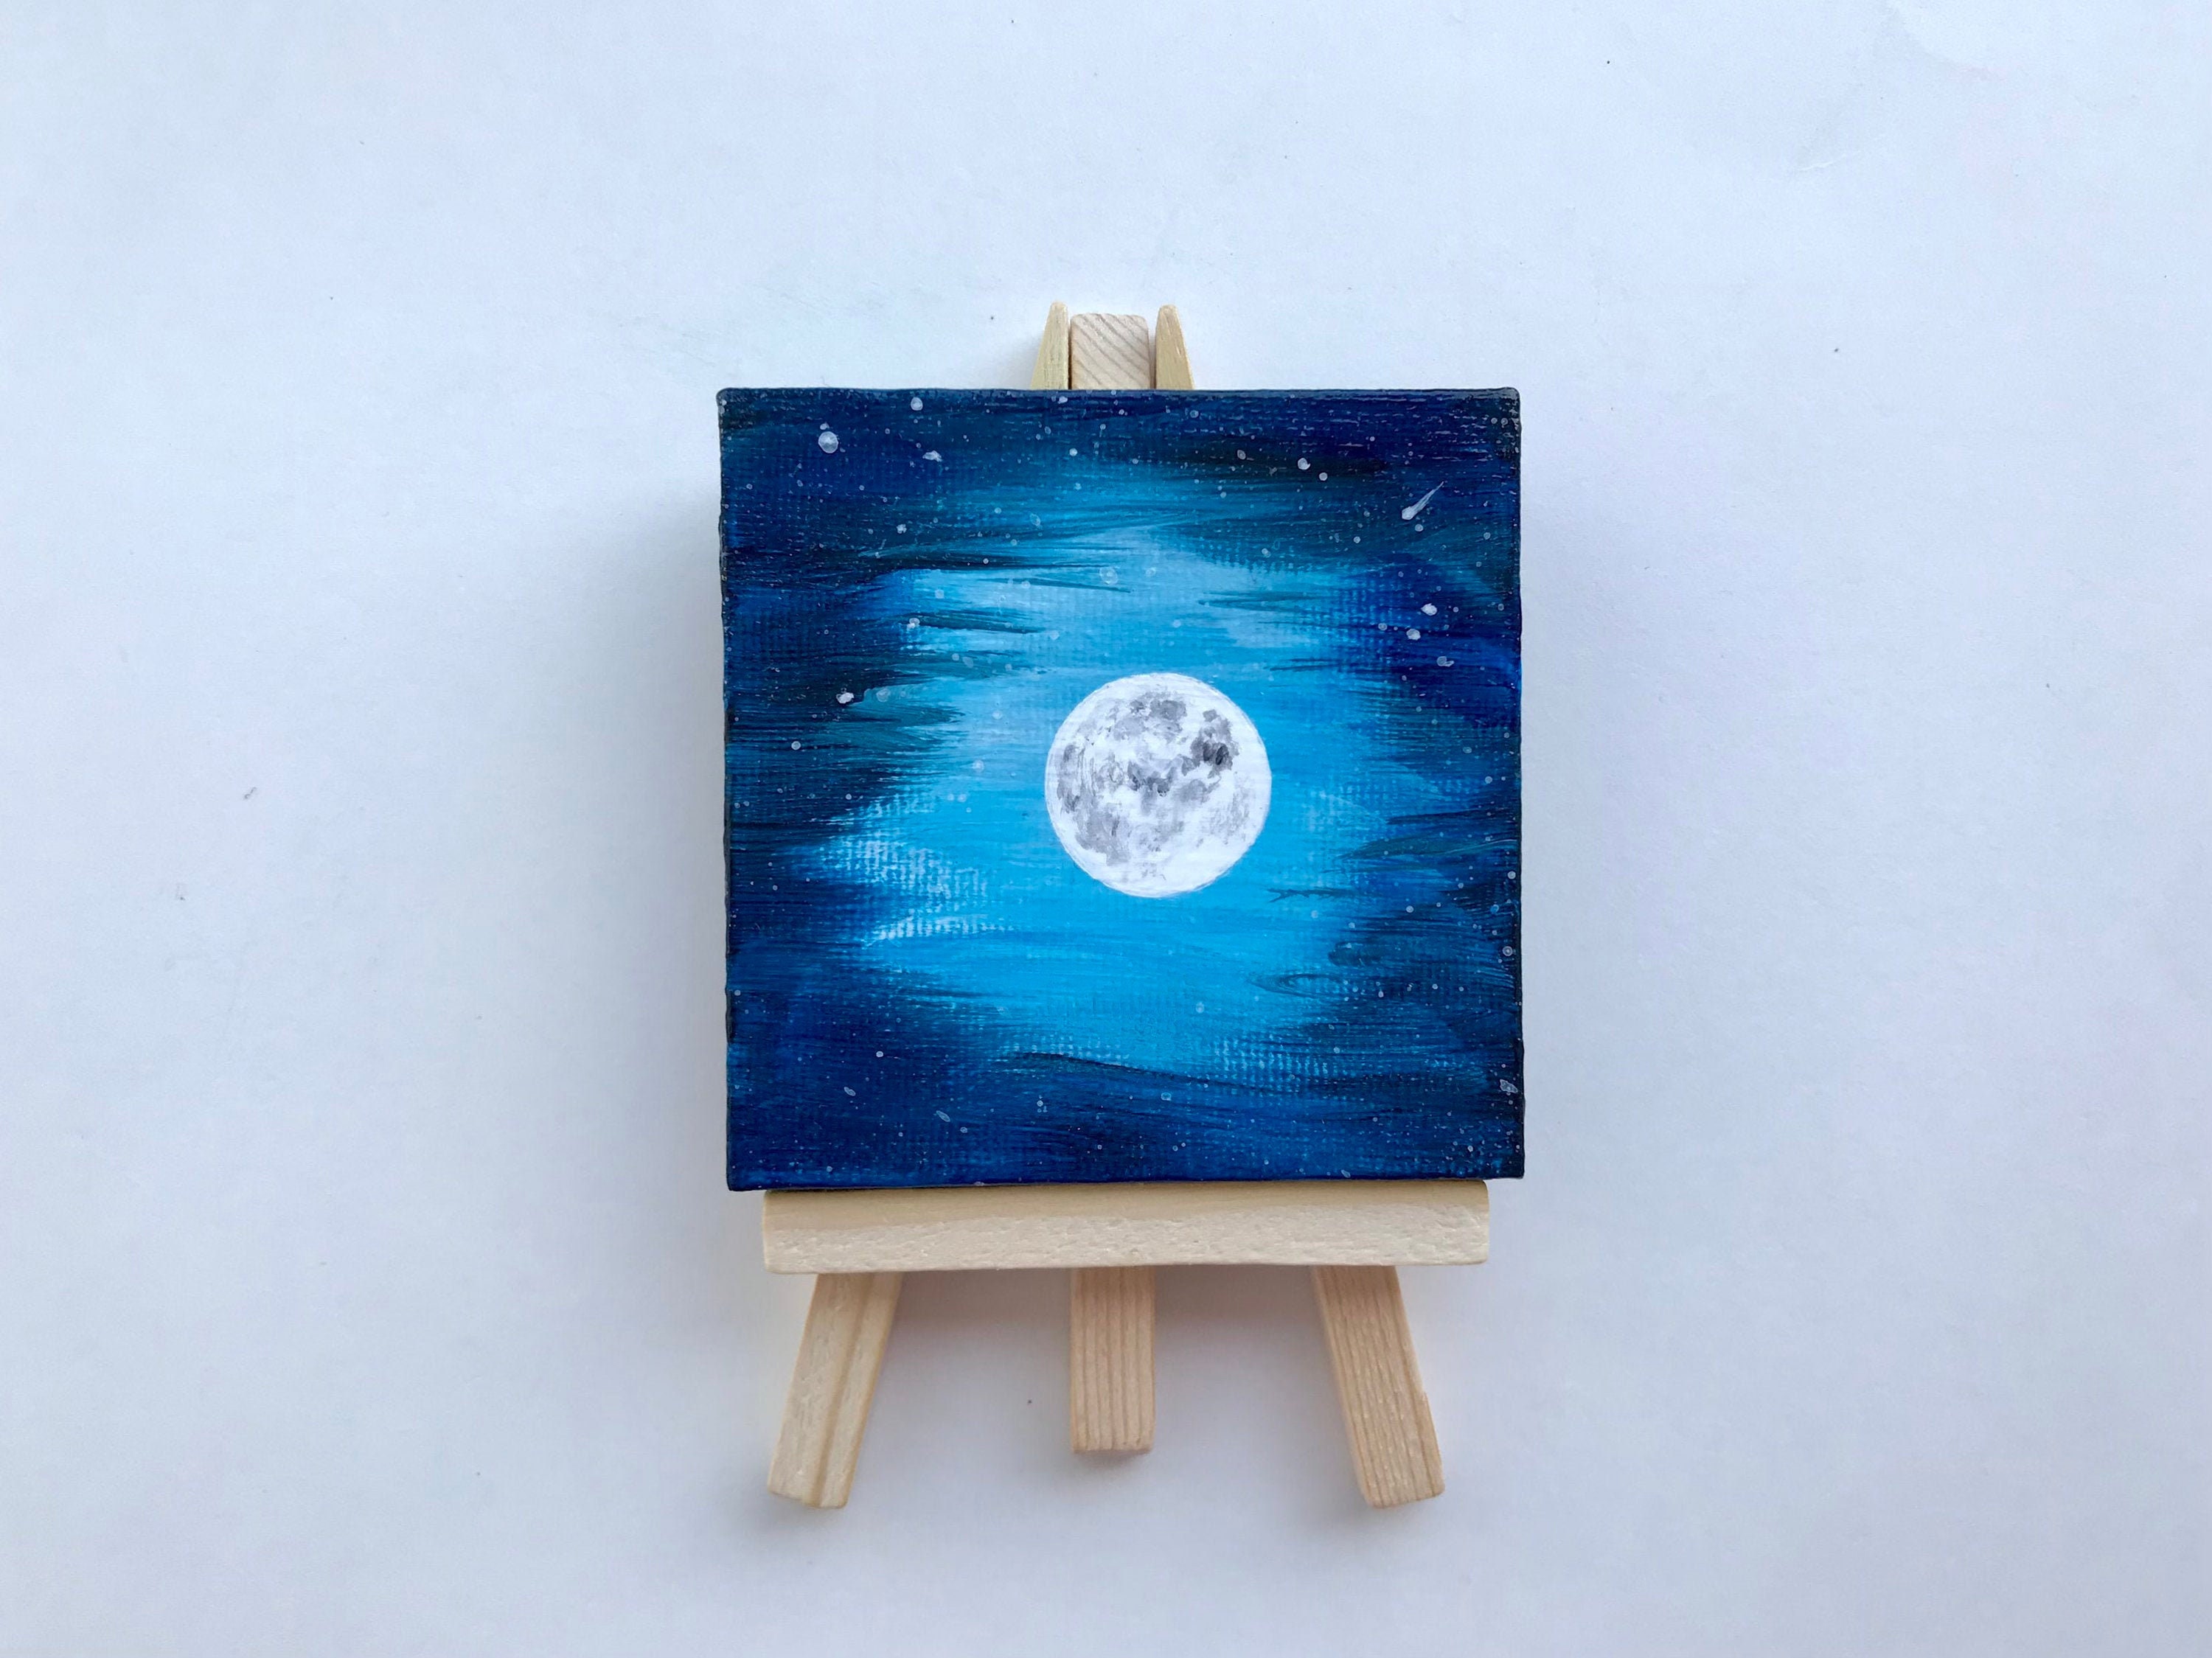 Abstract Full Moon Painting Small Painting on an Easel Original Artwork  Mini Canvas With an Easel AP311 